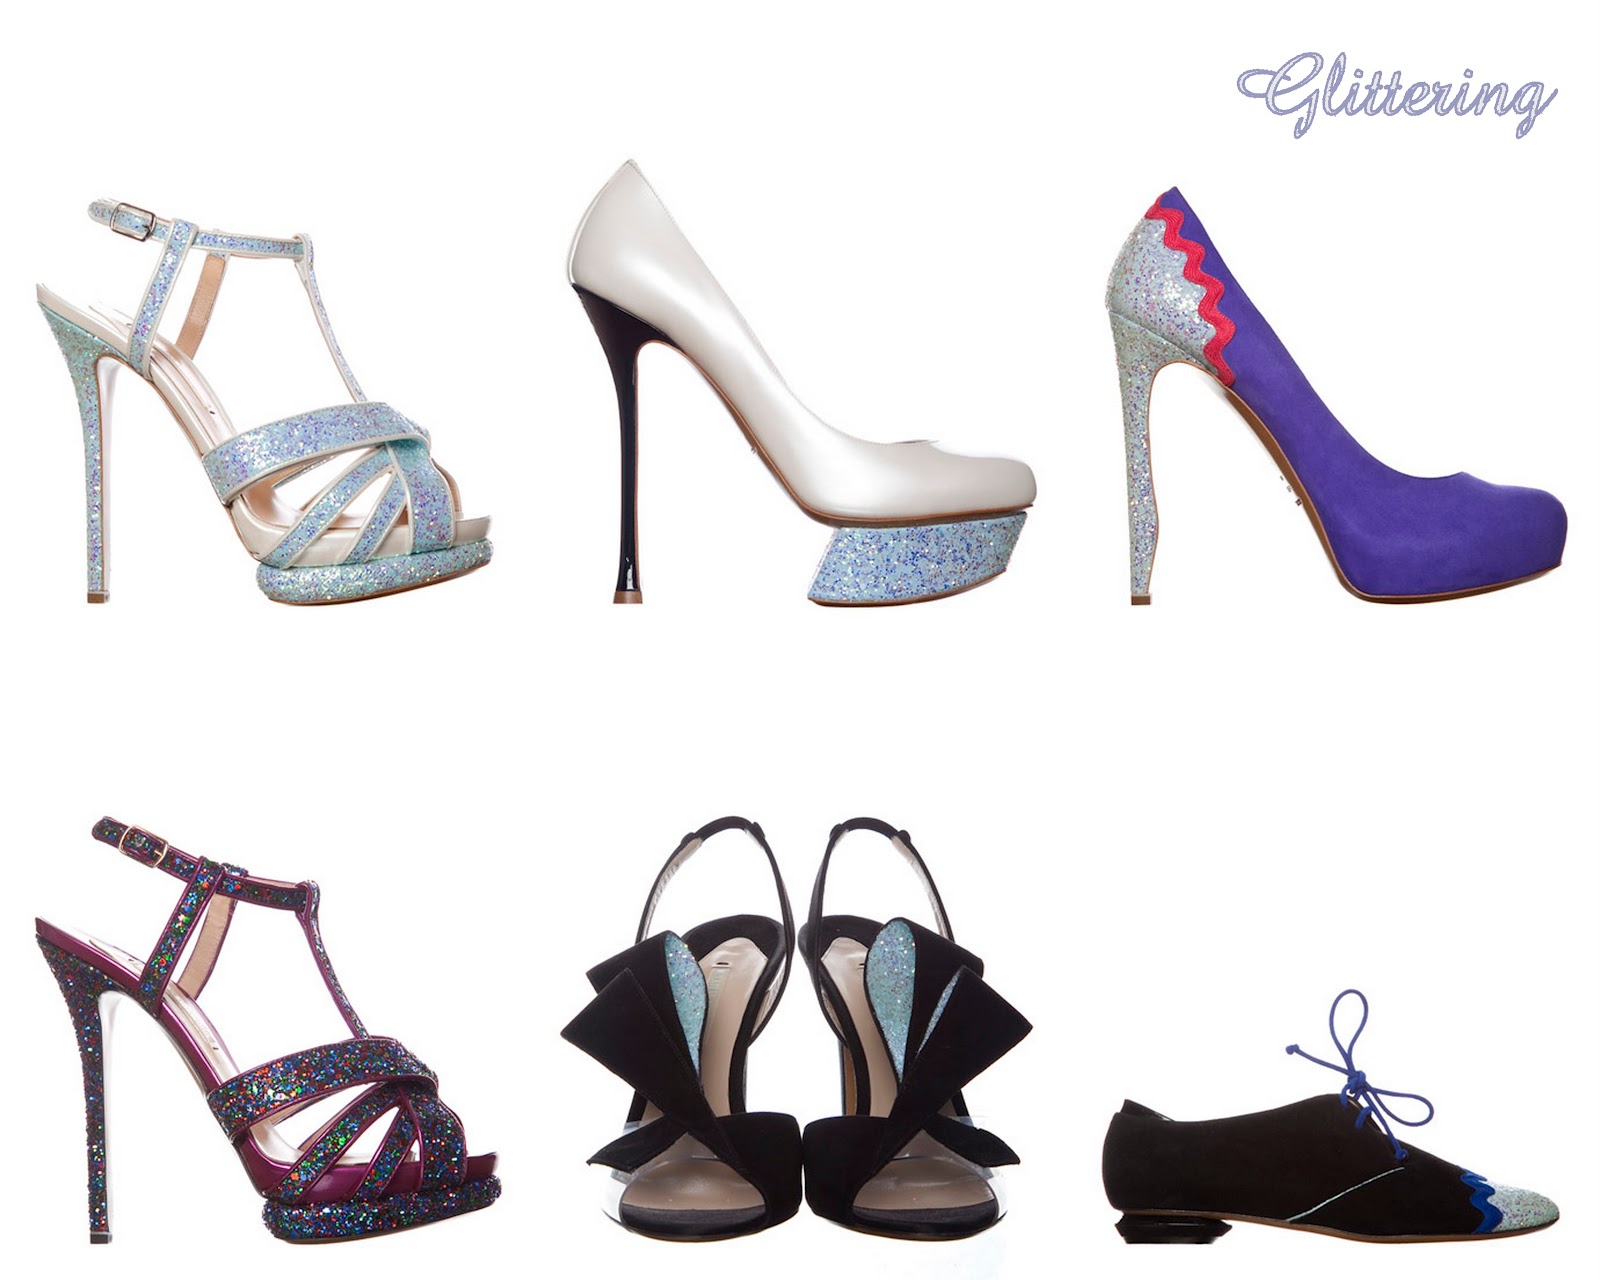 Frills and Thrills: Nicholas Kirkwood Shoes for Fall 2012